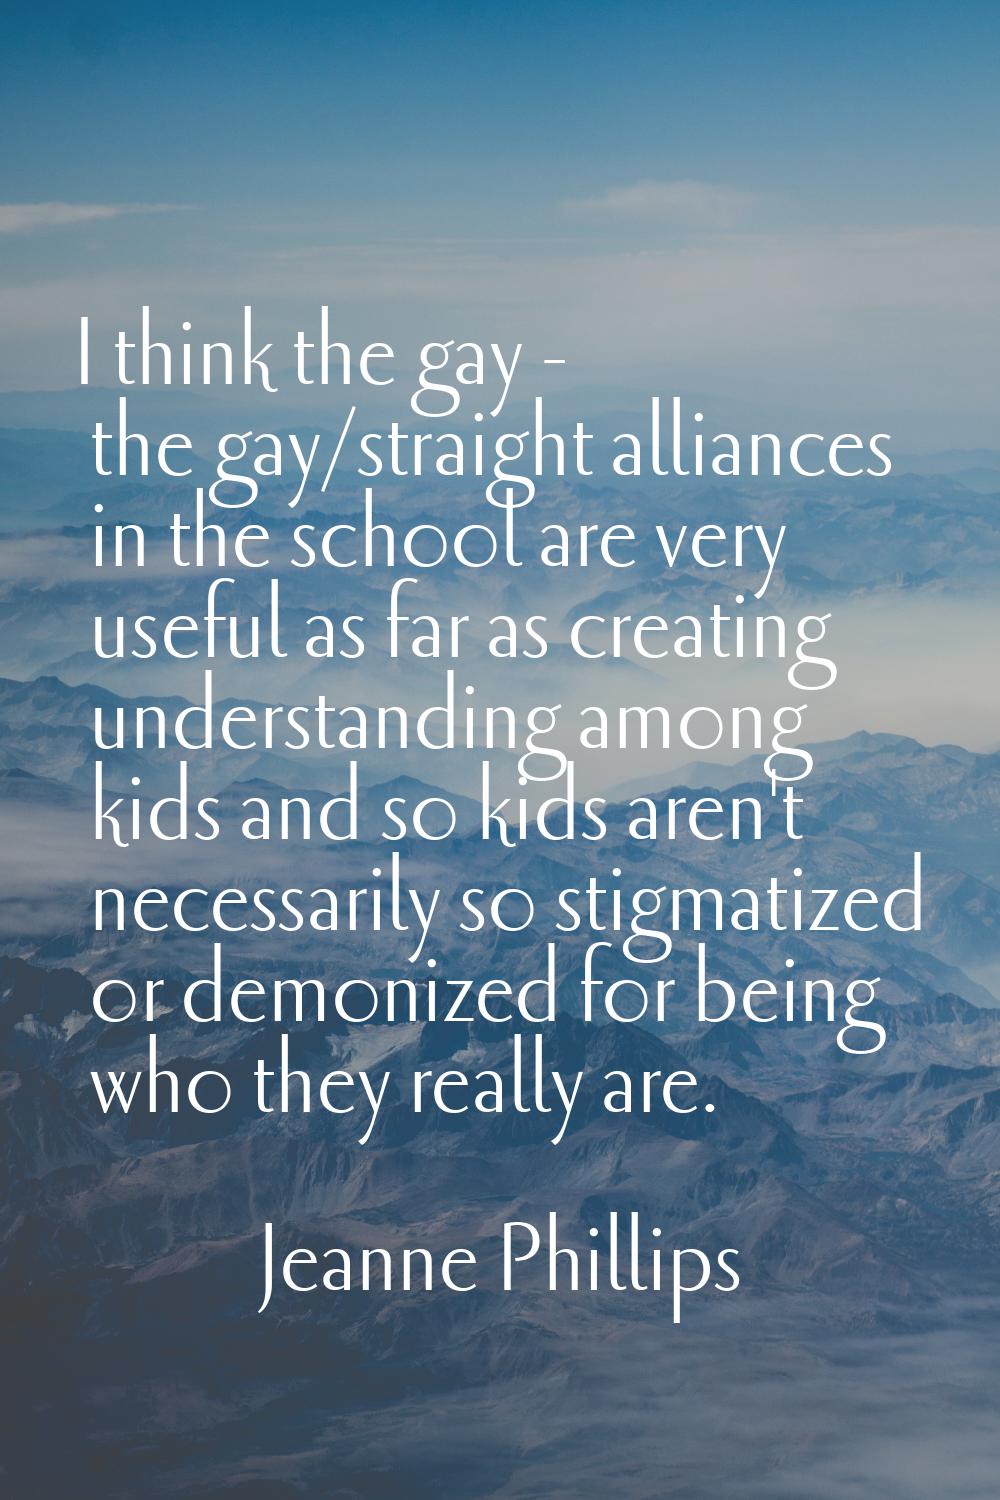 I think the gay - the gay/straight alliances in the school are very useful as far as creating under